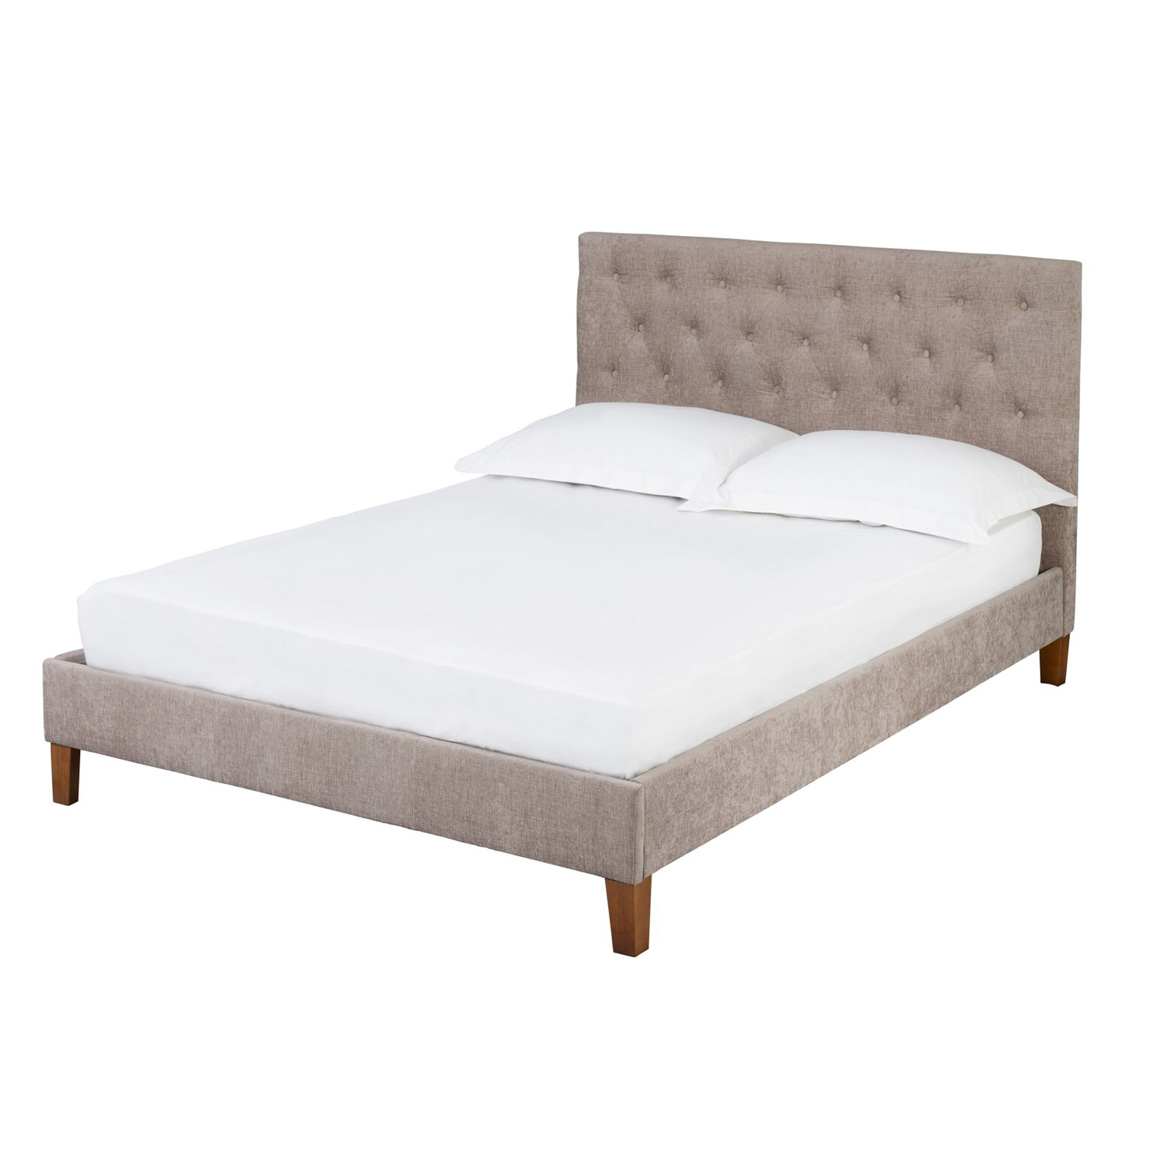 Darcy Mink Bed Frame Double King Size, King Size Bed Frame Finance